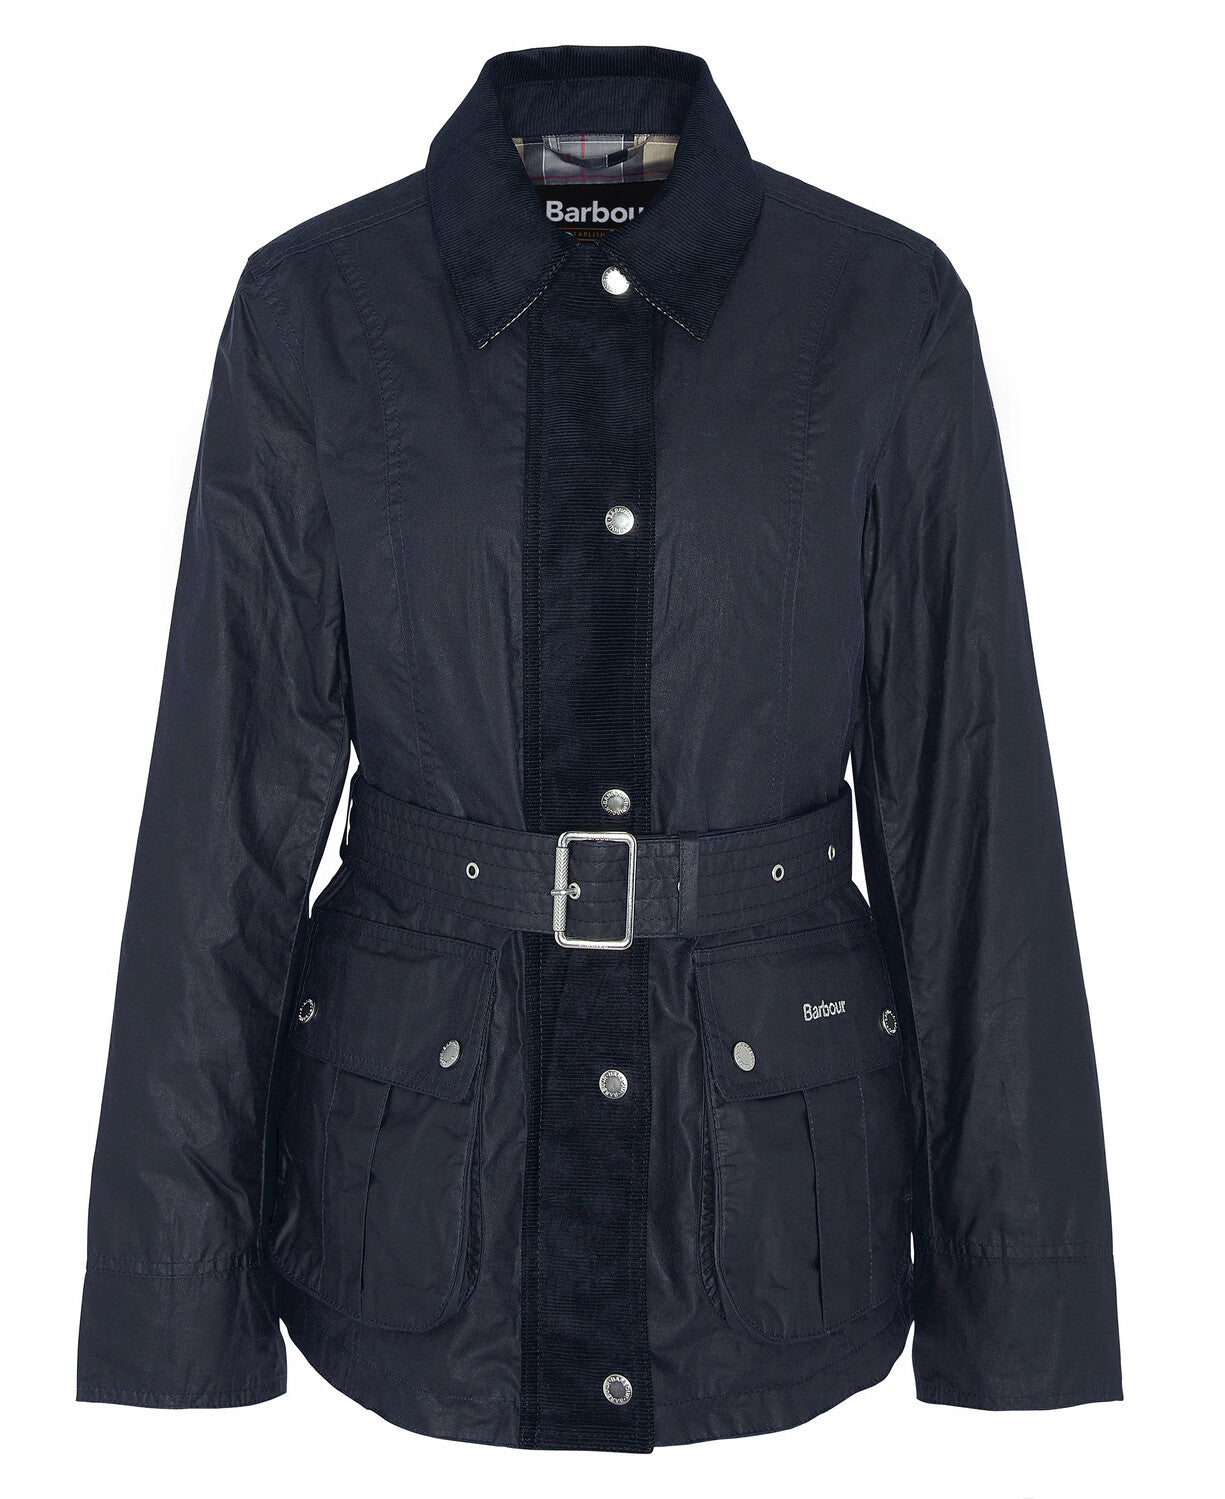 Barbour Lily Wax Royal Navy Jacket